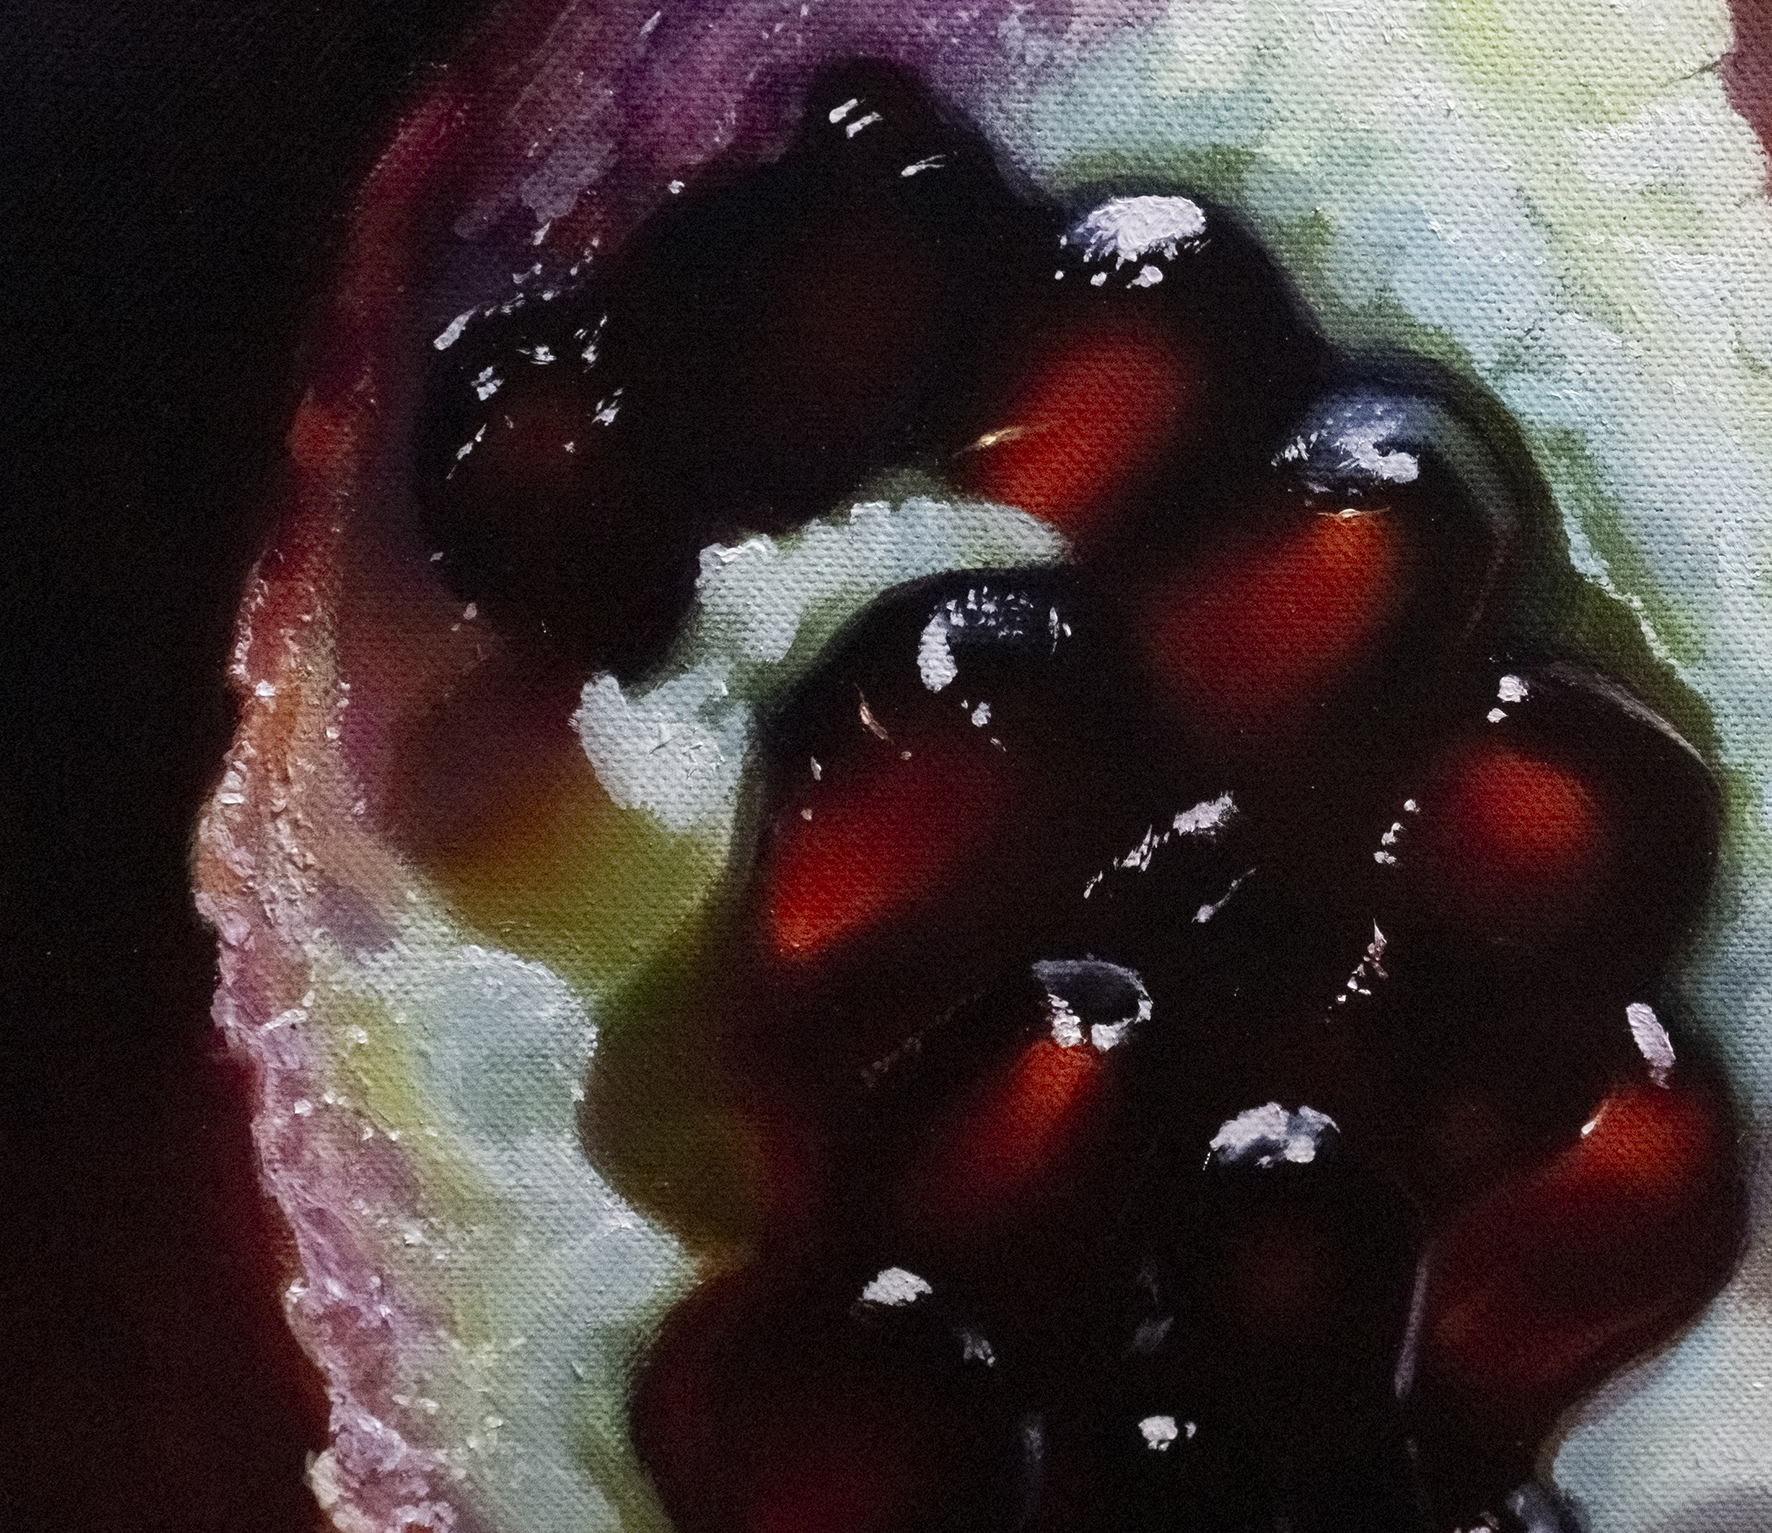 "Between heaven and earth." Still life with pomegranate, painting. Artist Anna Grechina.